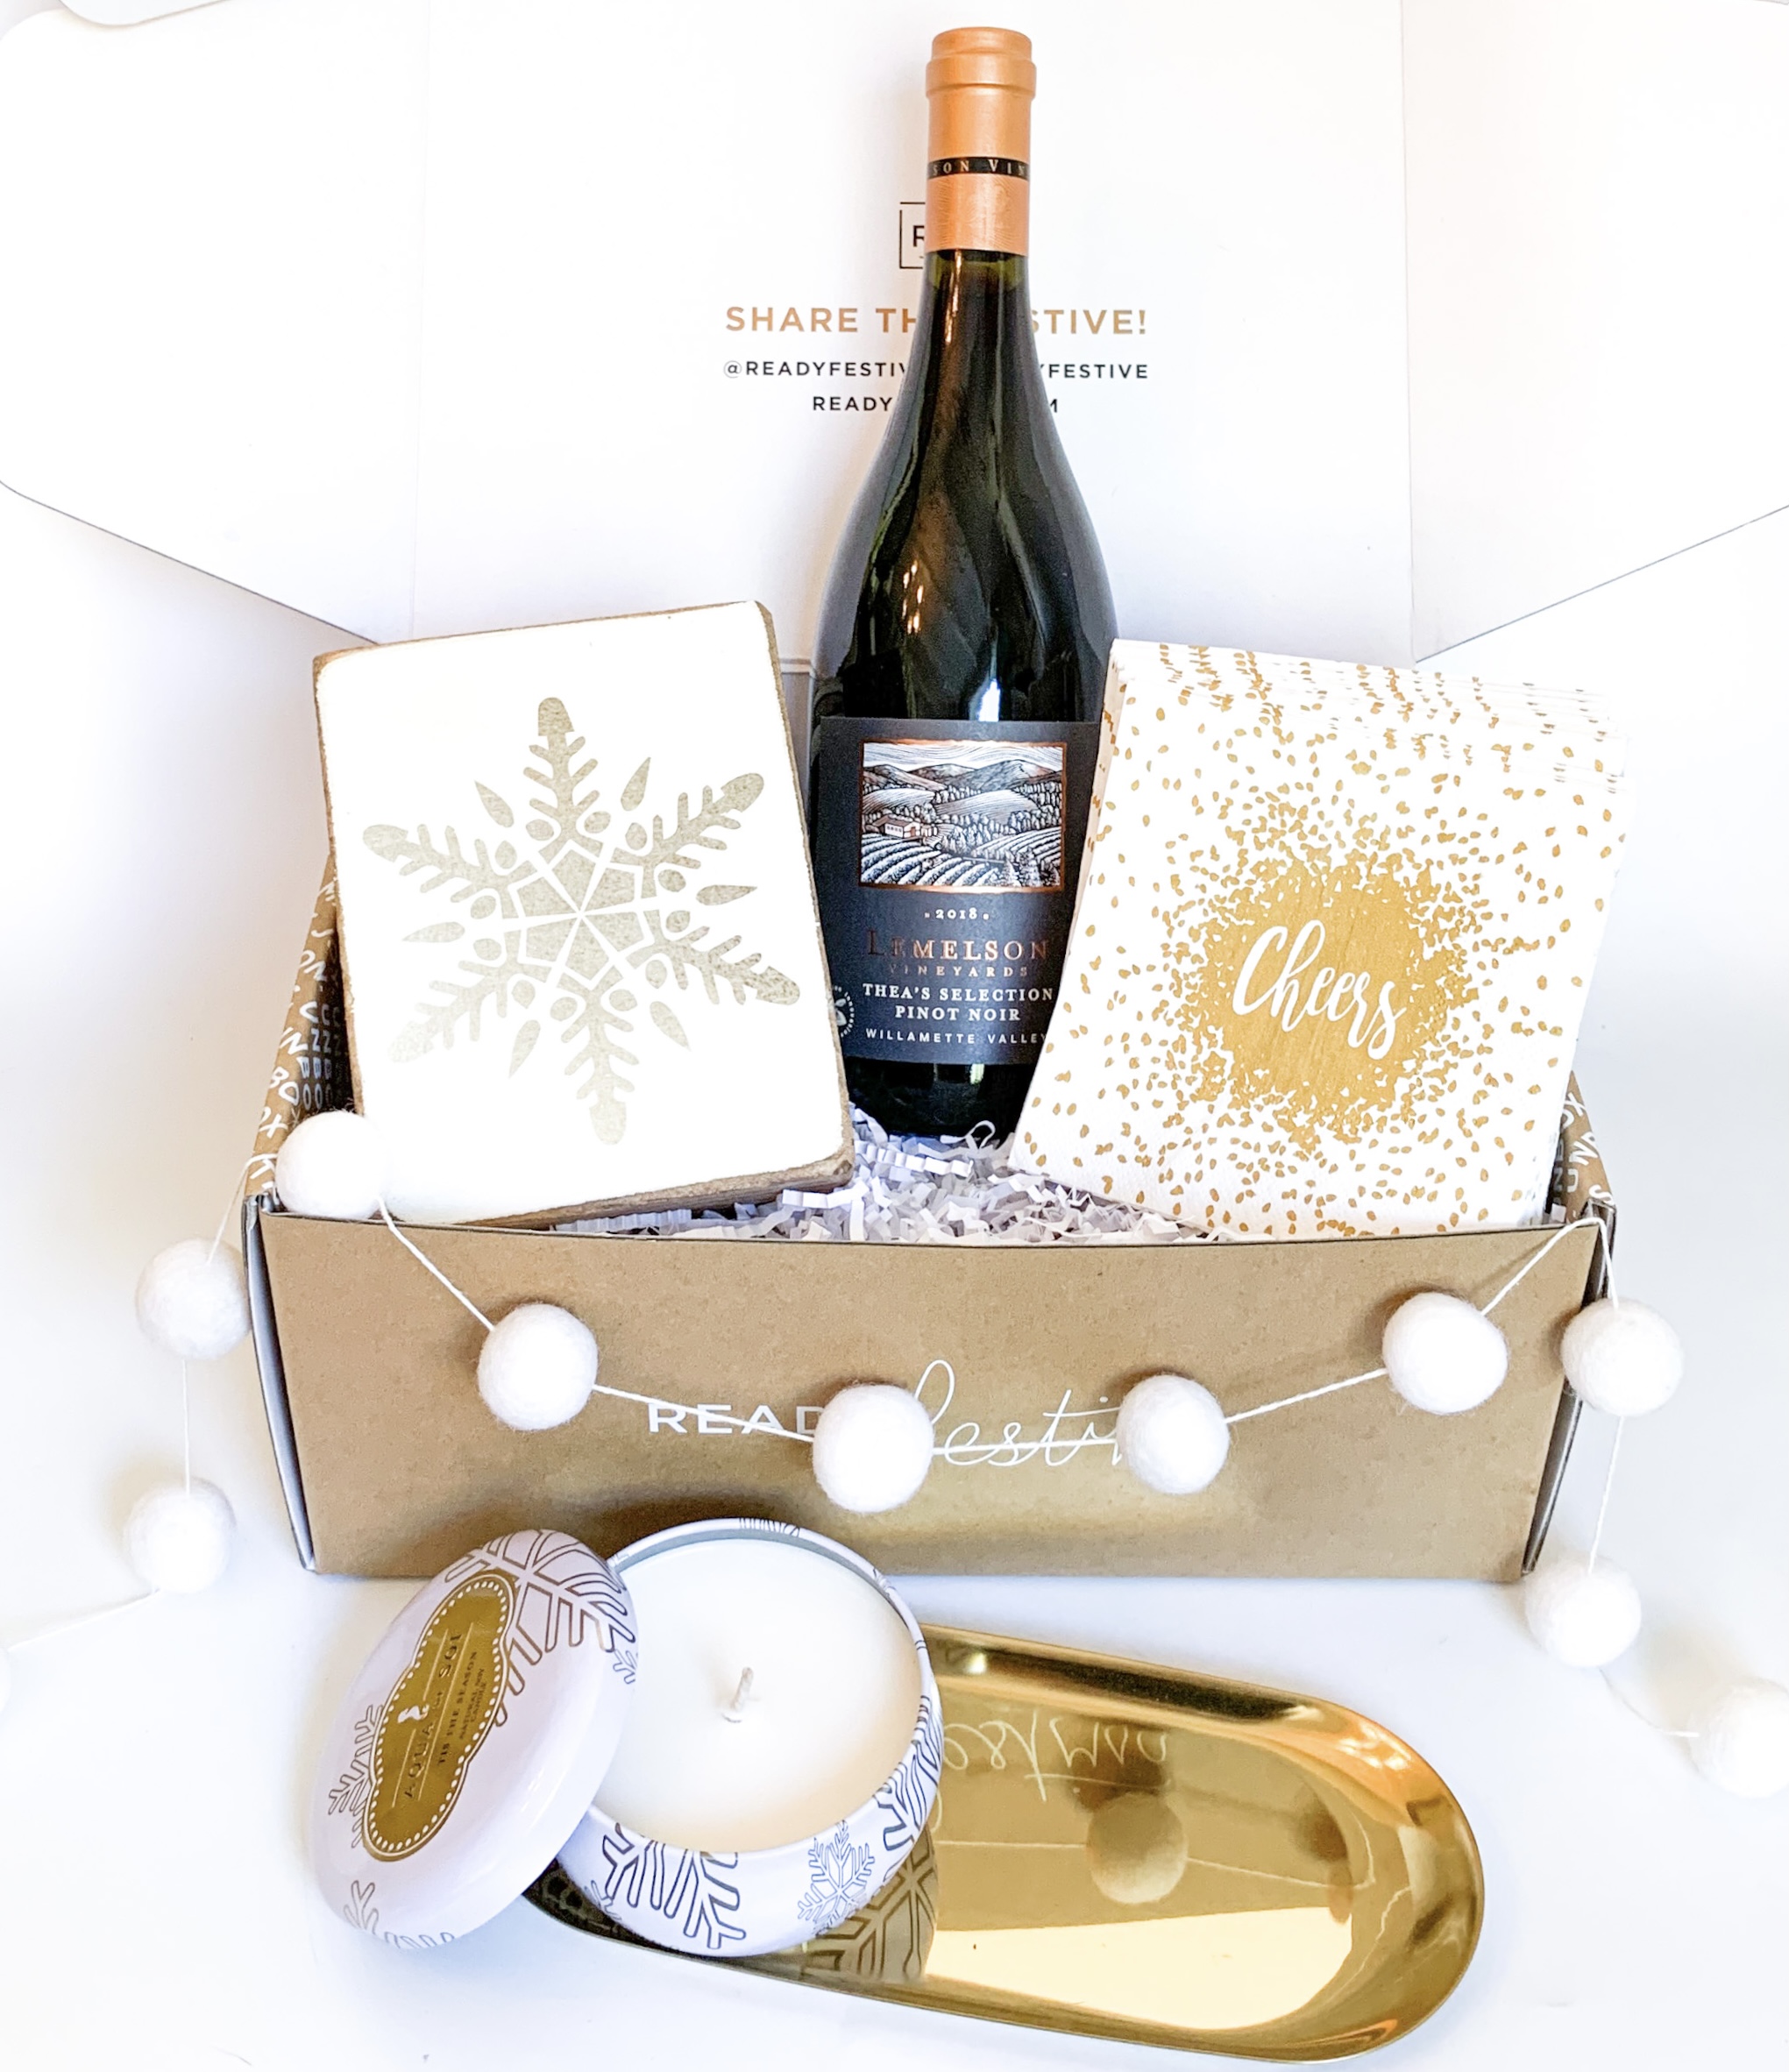 A Carefully Curated Luxury Gift Guide For Wine Lovers